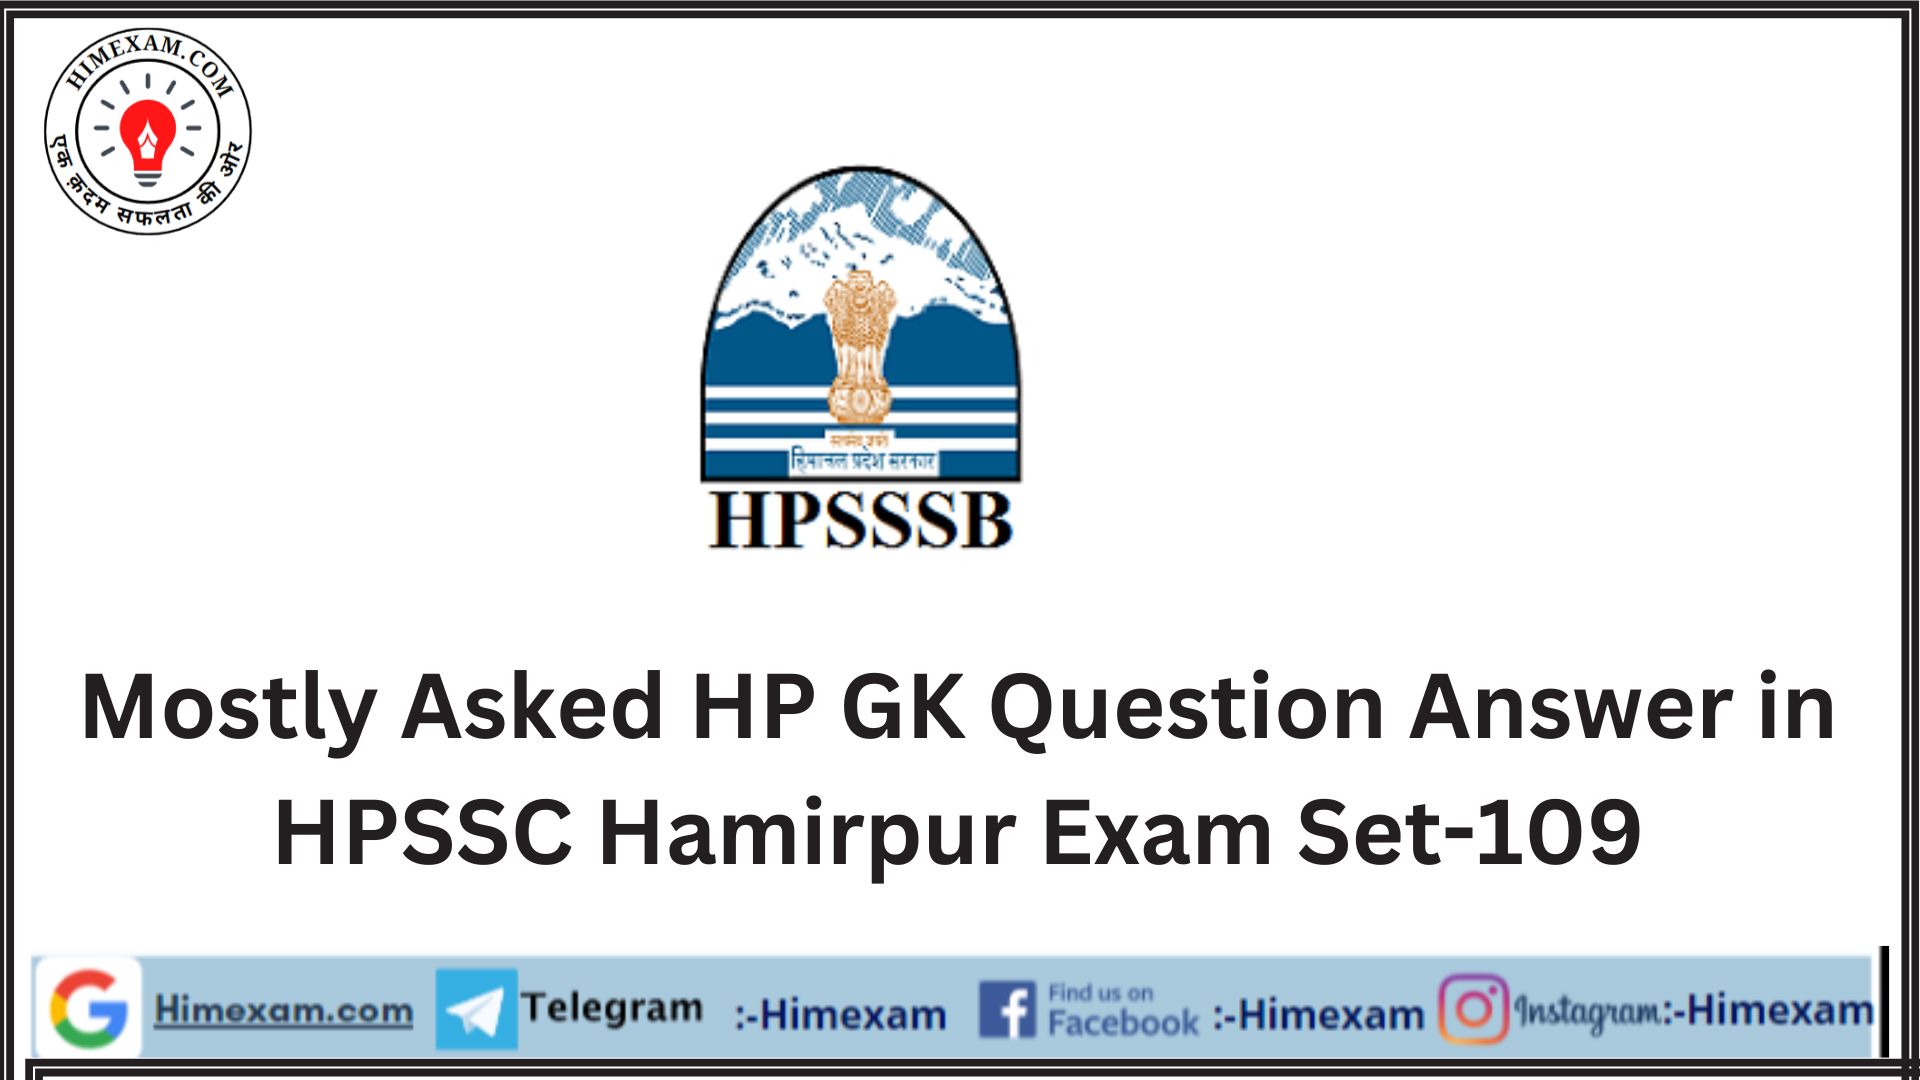 Mostly Asked HP GK Question Answer in HPSSC Hamirpur Exam Set-109